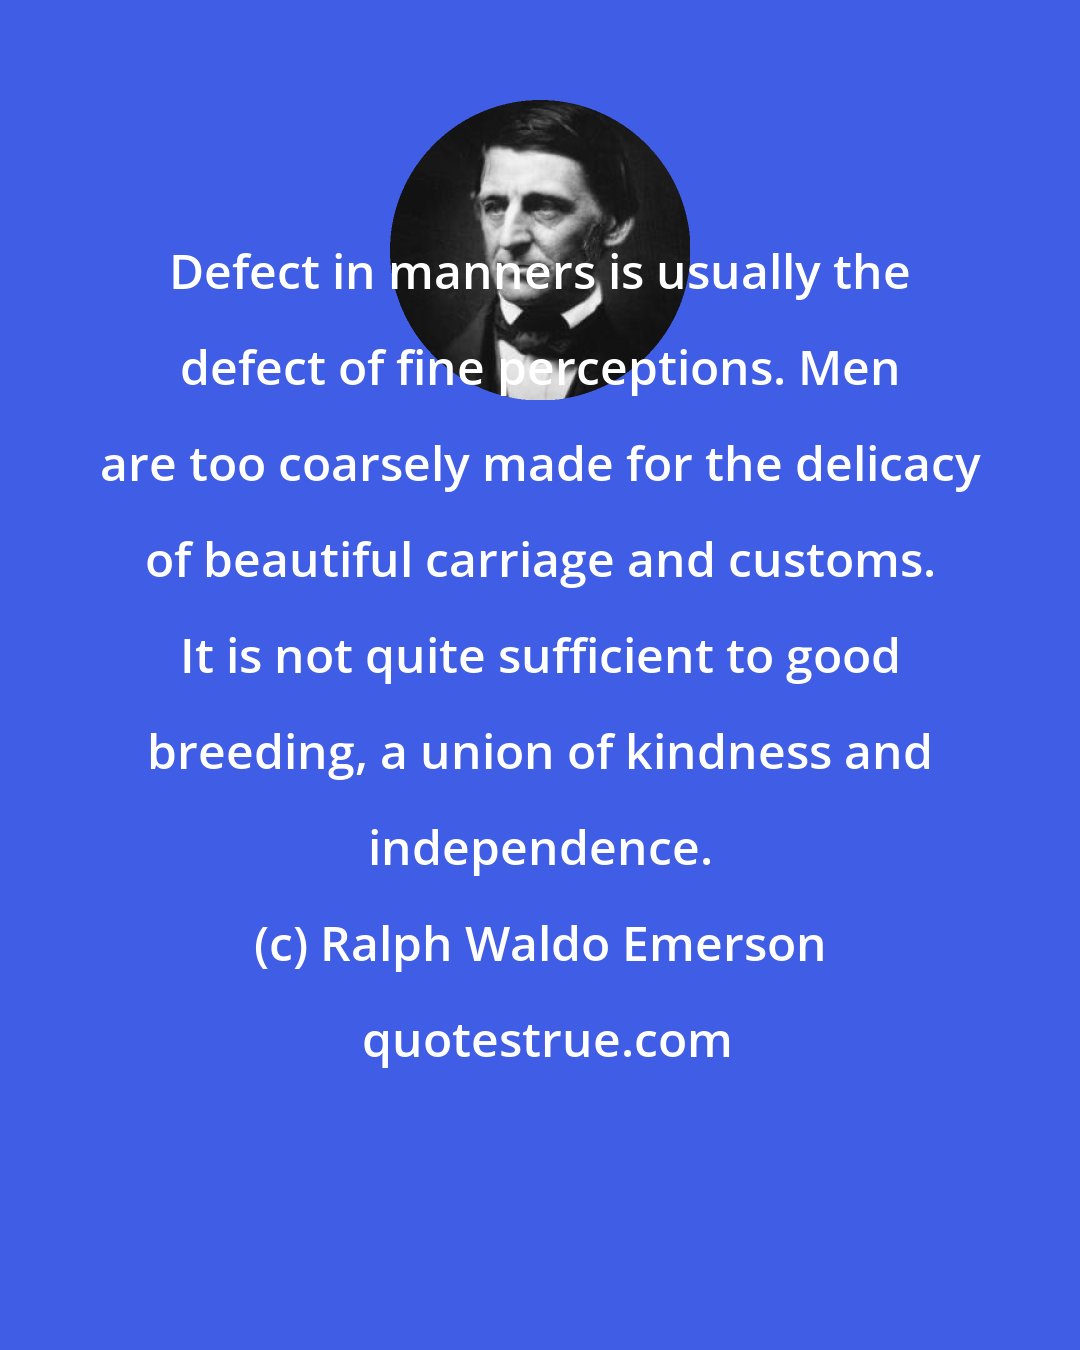 Ralph Waldo Emerson: Defect in manners is usually the defect of fine perceptions. Men are too coarsely made for the delicacy of beautiful carriage and customs. It is not quite sufficient to good breeding, a union of kindness and independence.